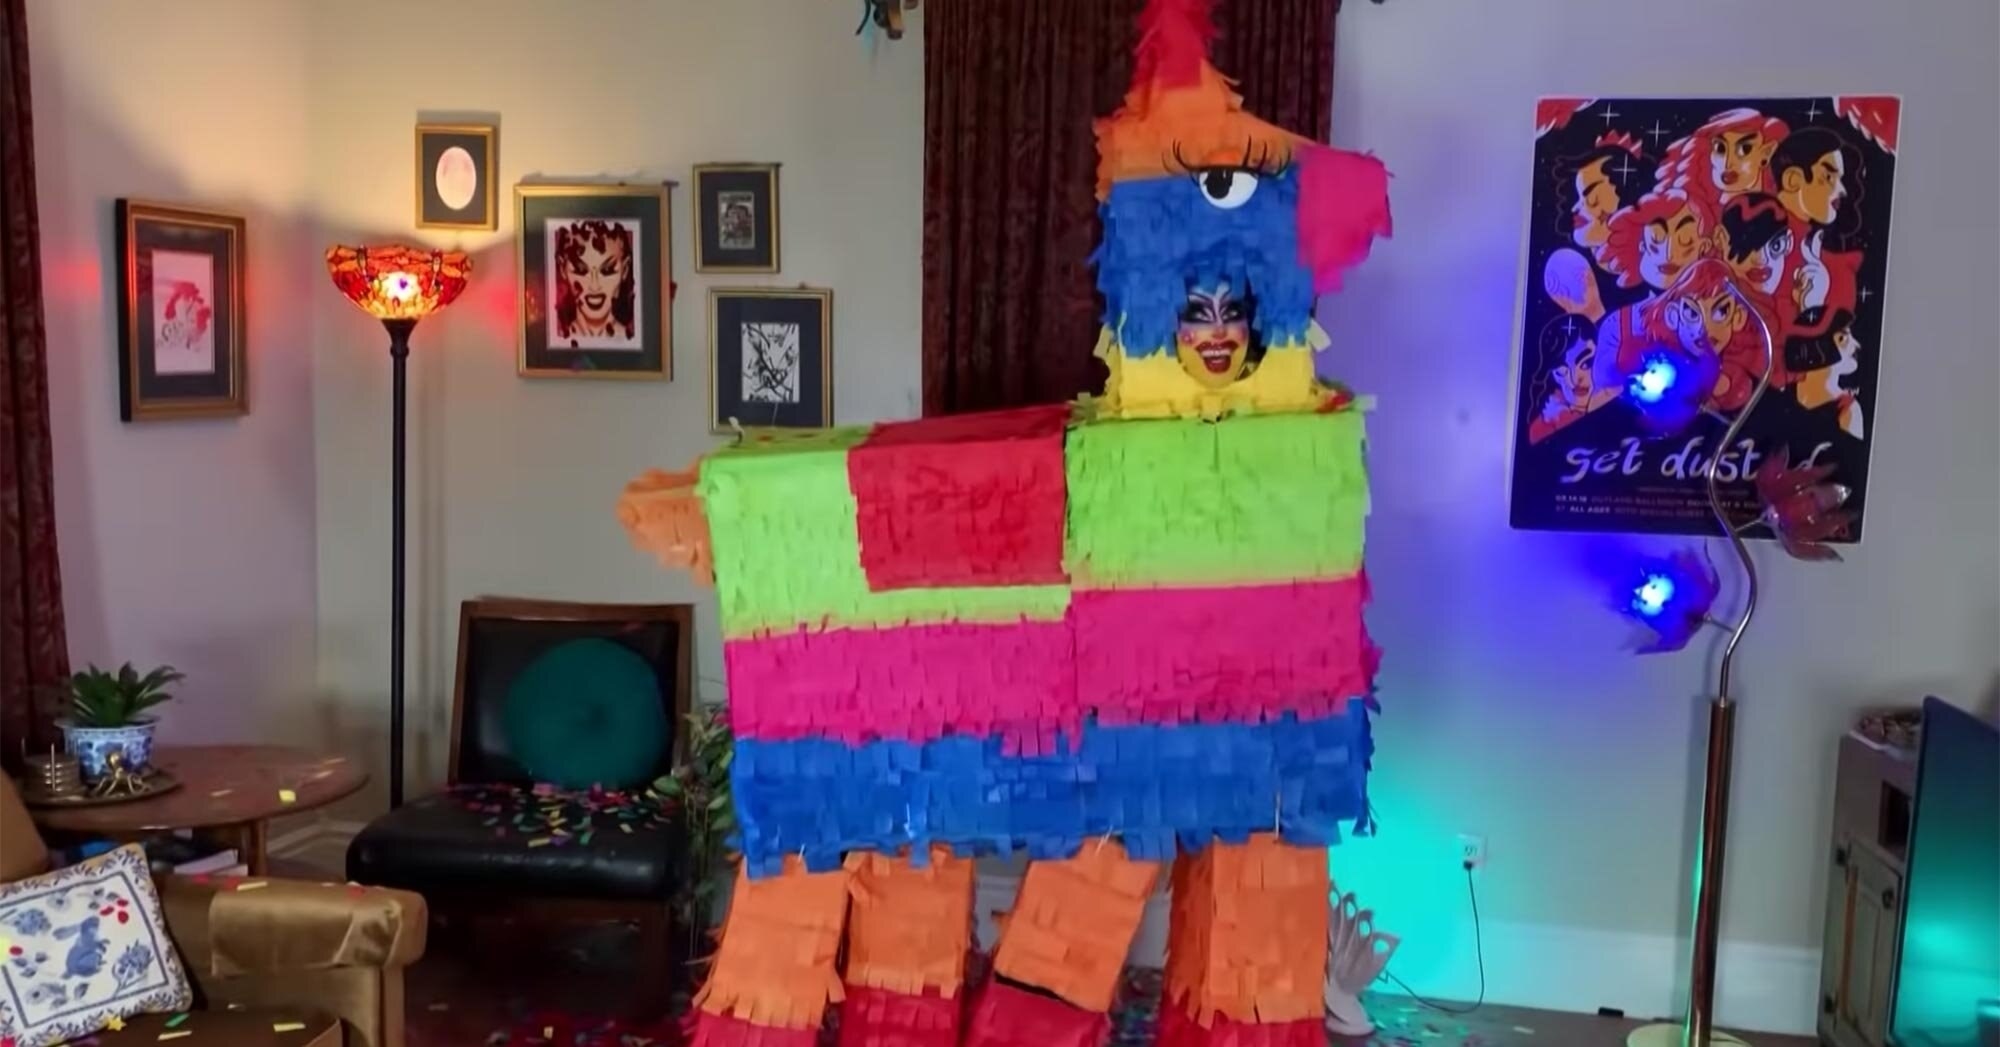 Drag queen Crystal Methyd literally dressed as a giant pinata